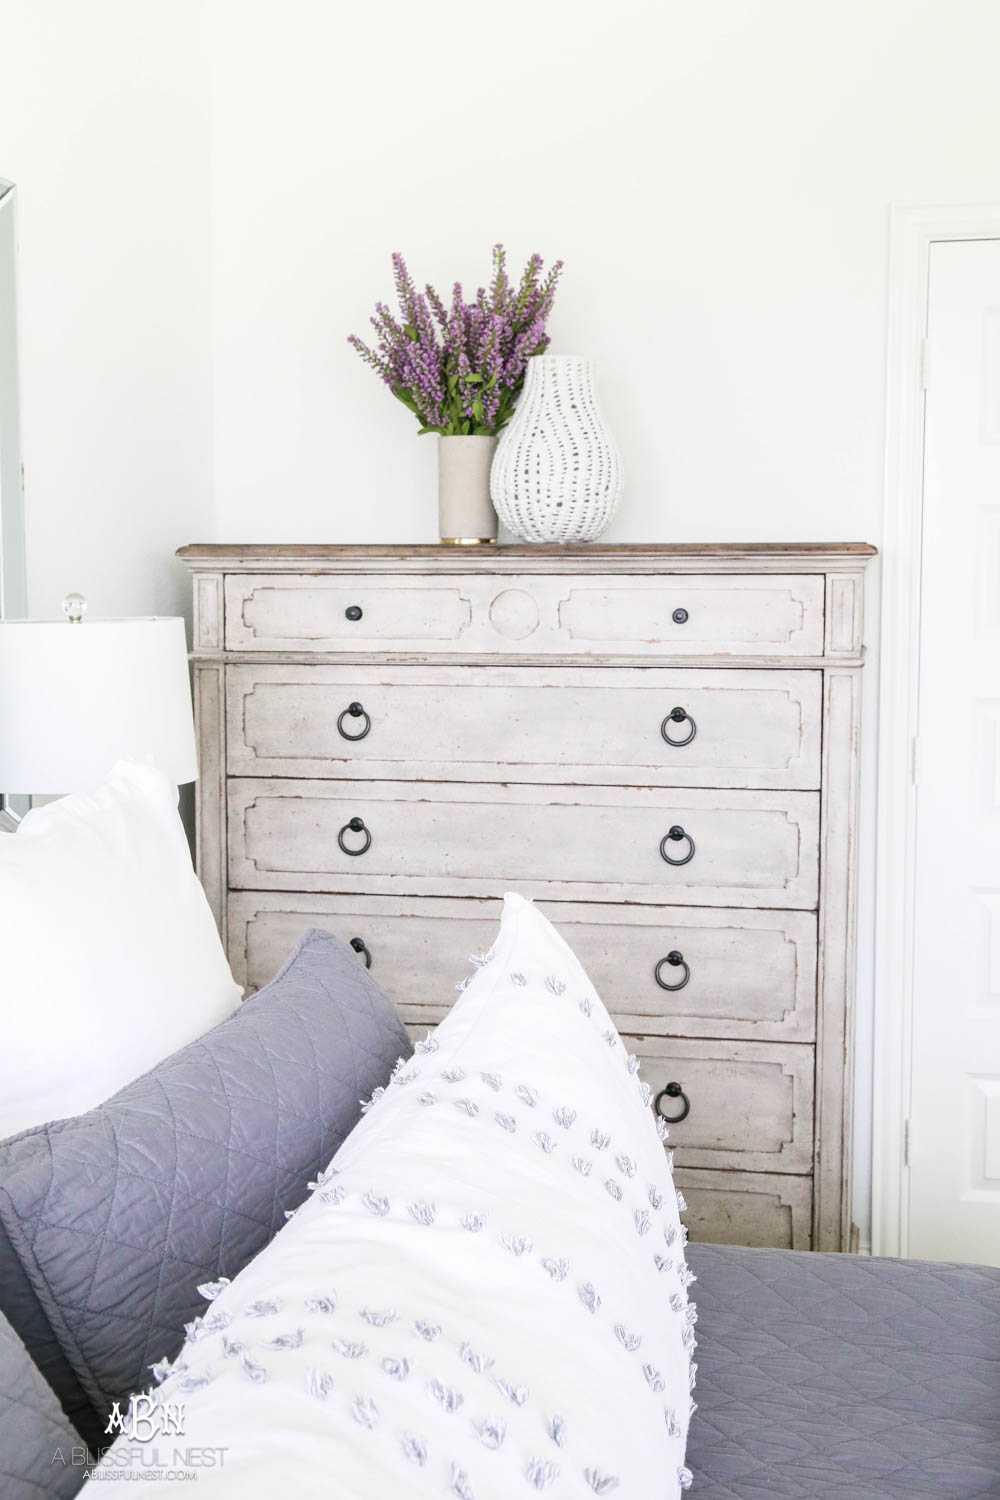 These bedroom decor ideas from Bassett Furniture are so simple and easy to pull a bedroom design together. #ad #BassettFurniture #mybassett